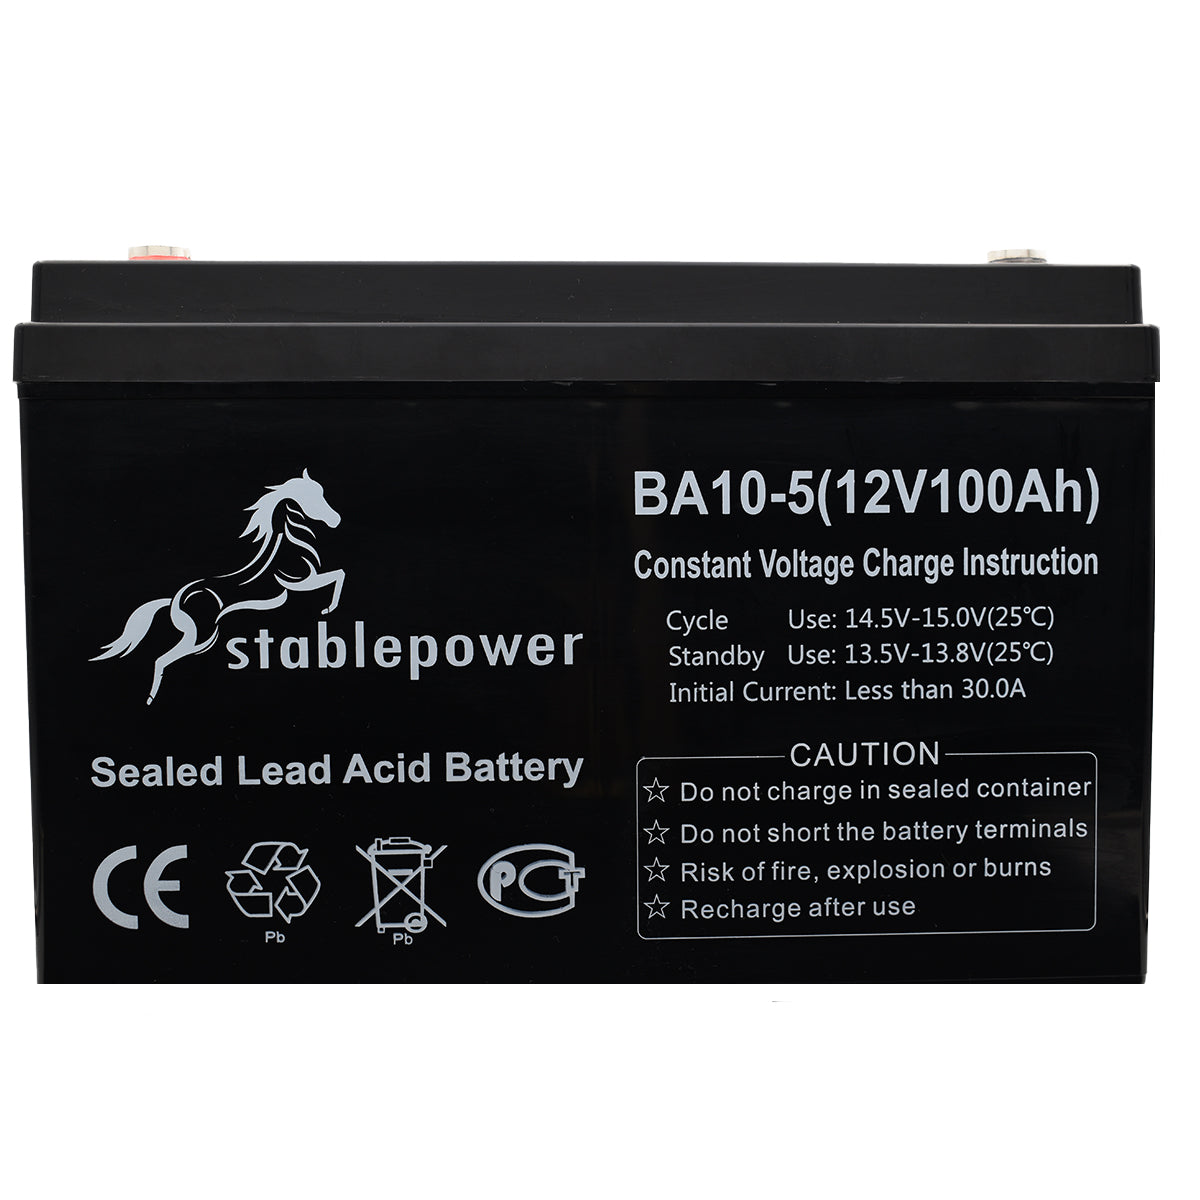 Stablepower 12V 100AH Rechargeable Sealed Lead Acid Battery Image 2 BA10-5